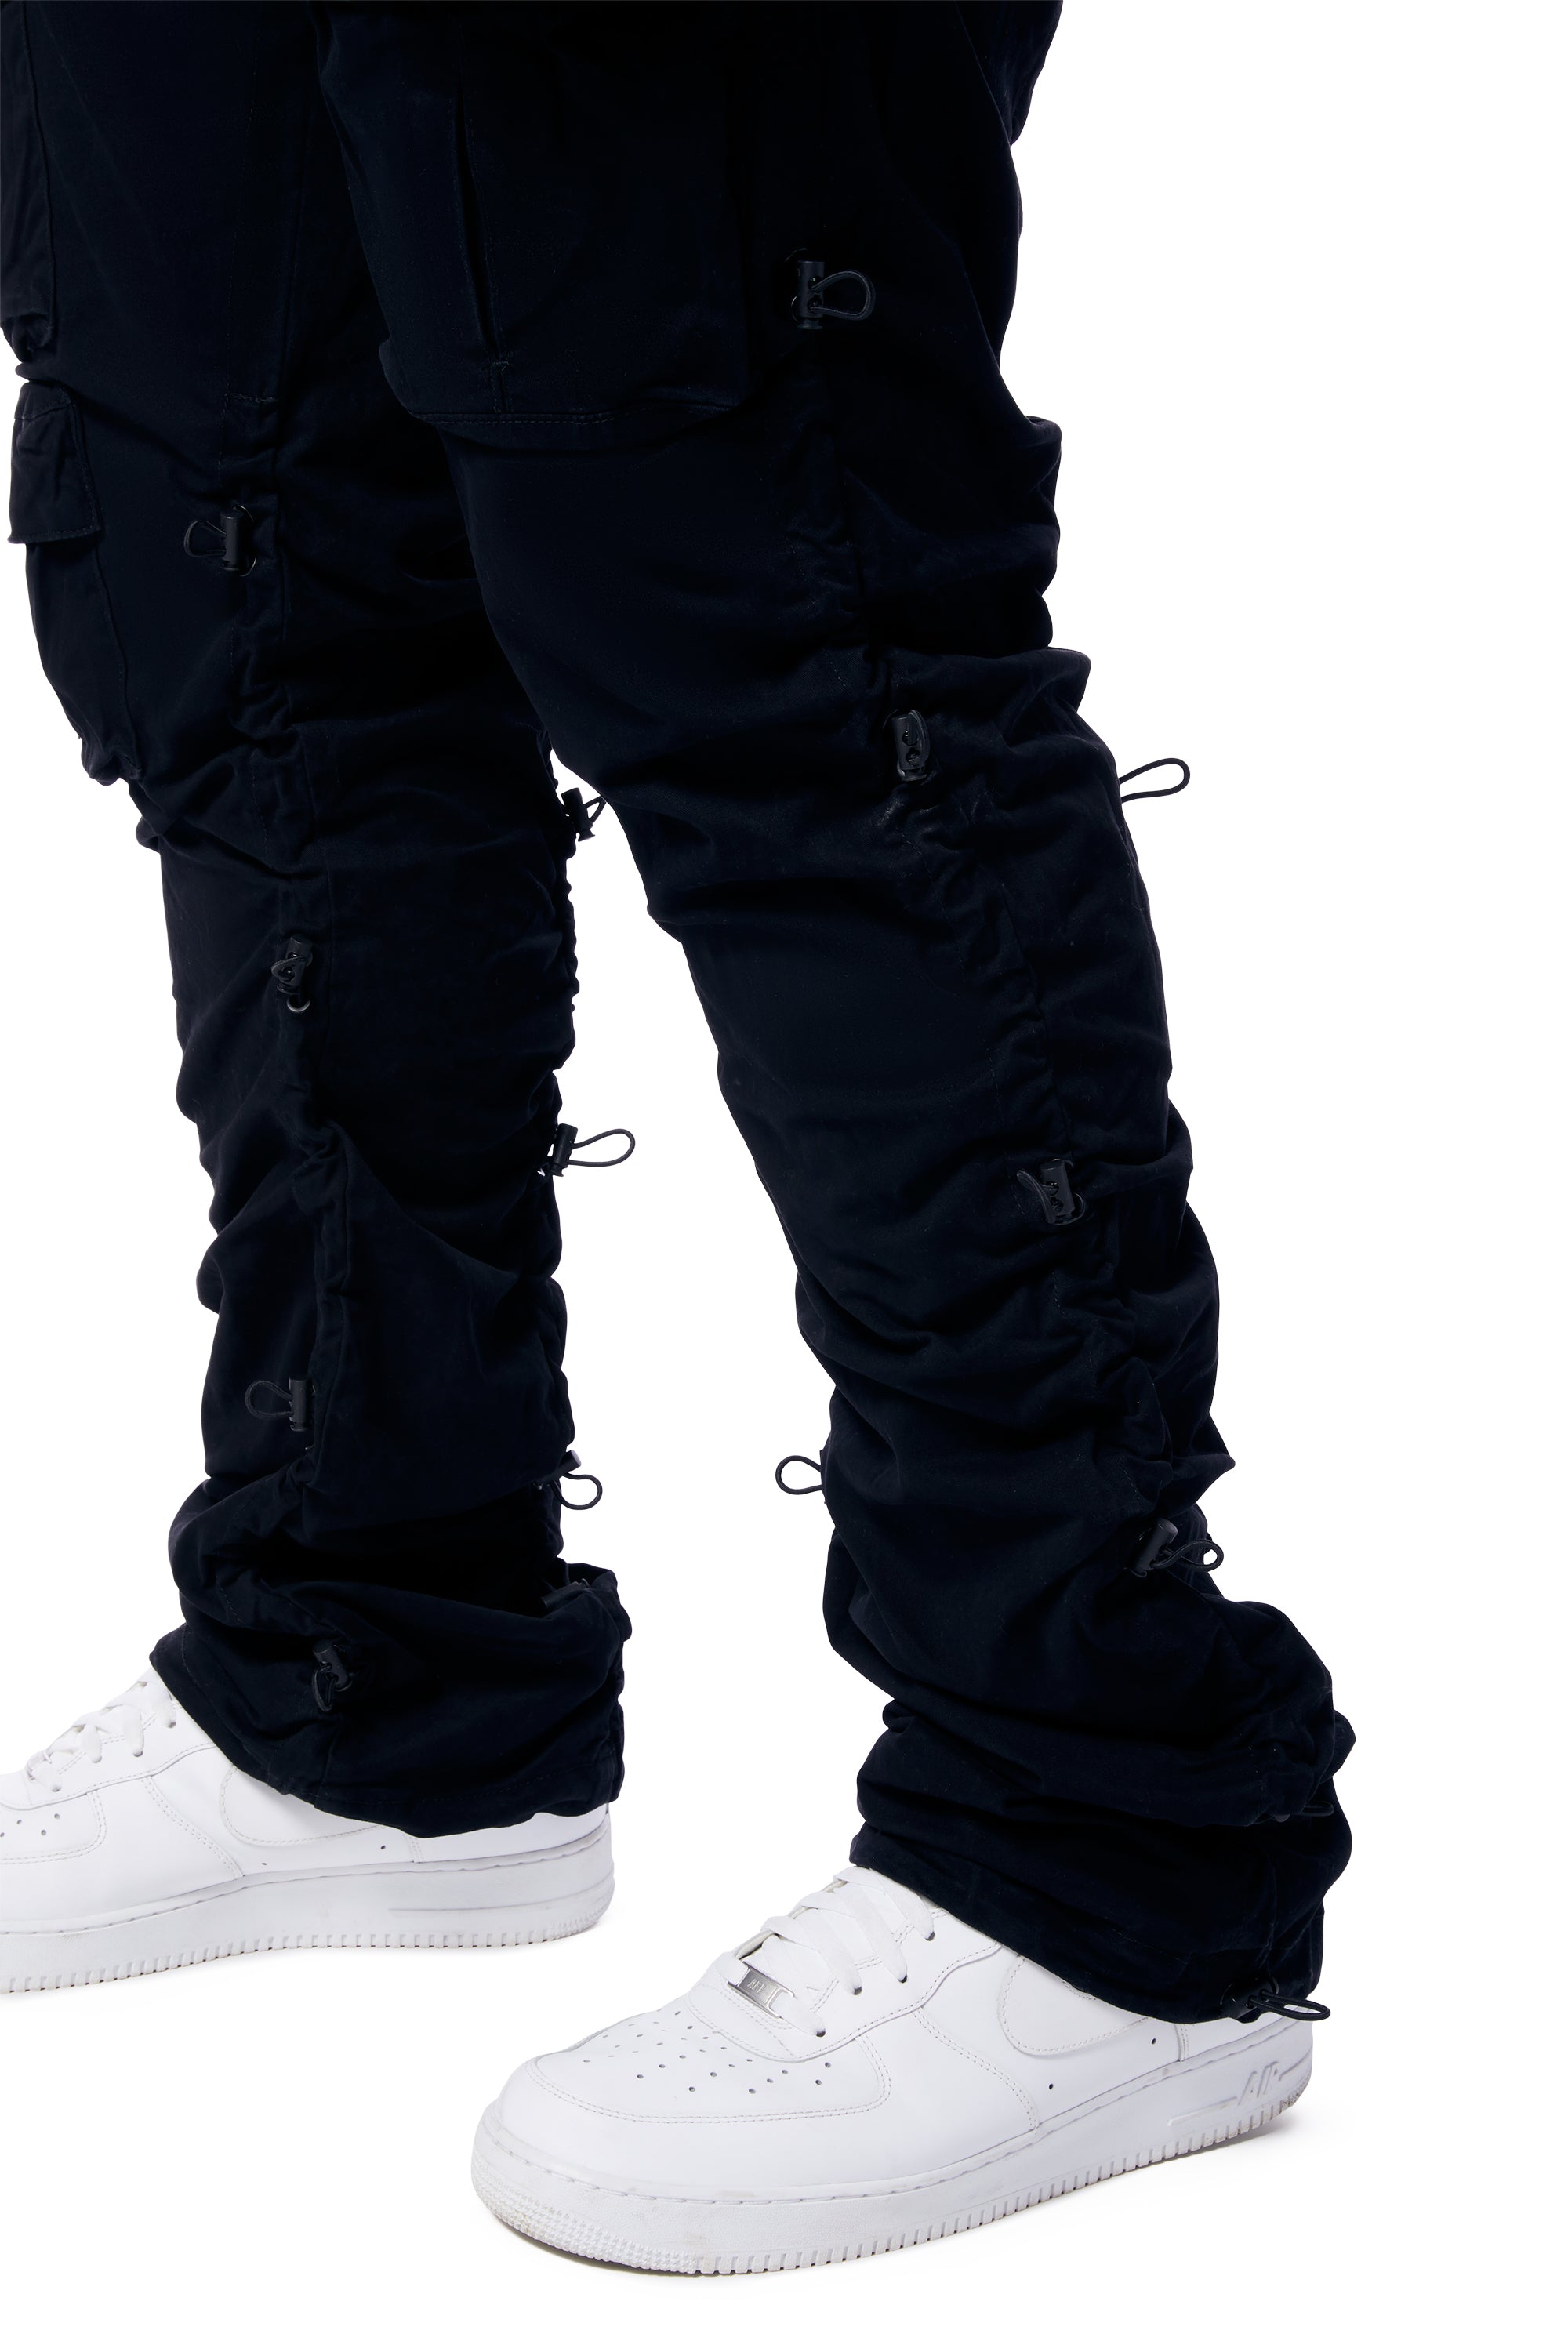 Big and Tall - Utility Bungee Twill Pants - Black